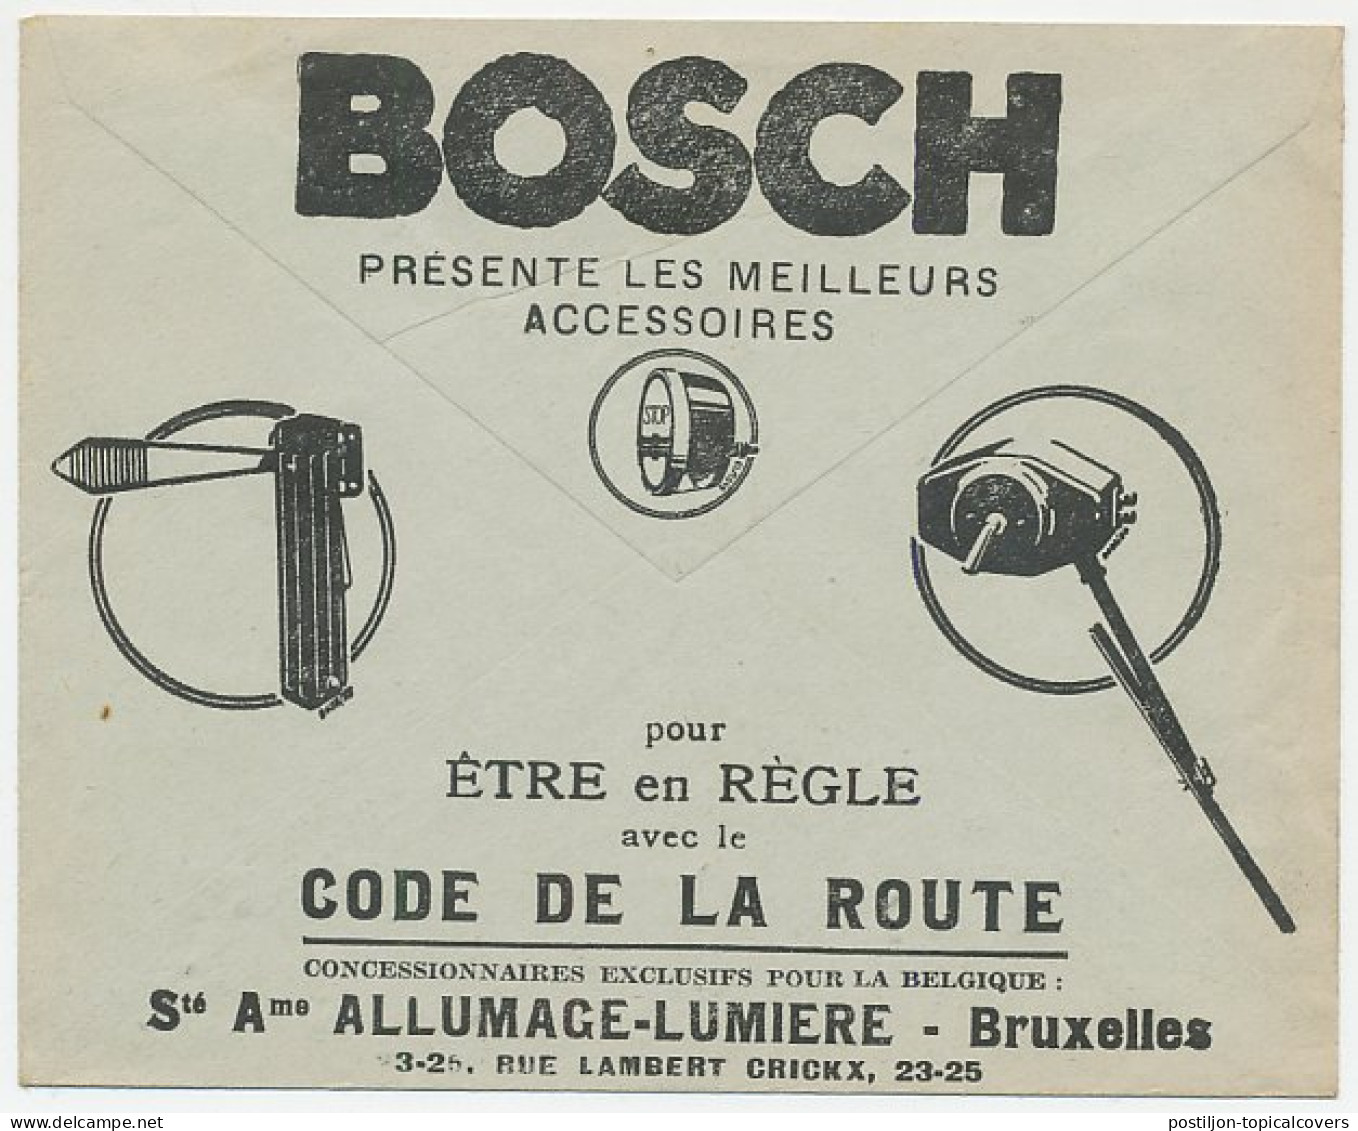 Postal Cheque Cover Belgium 1934 Car Accessory - Direction Indicator - Canadian Pacific Railway - Auto's